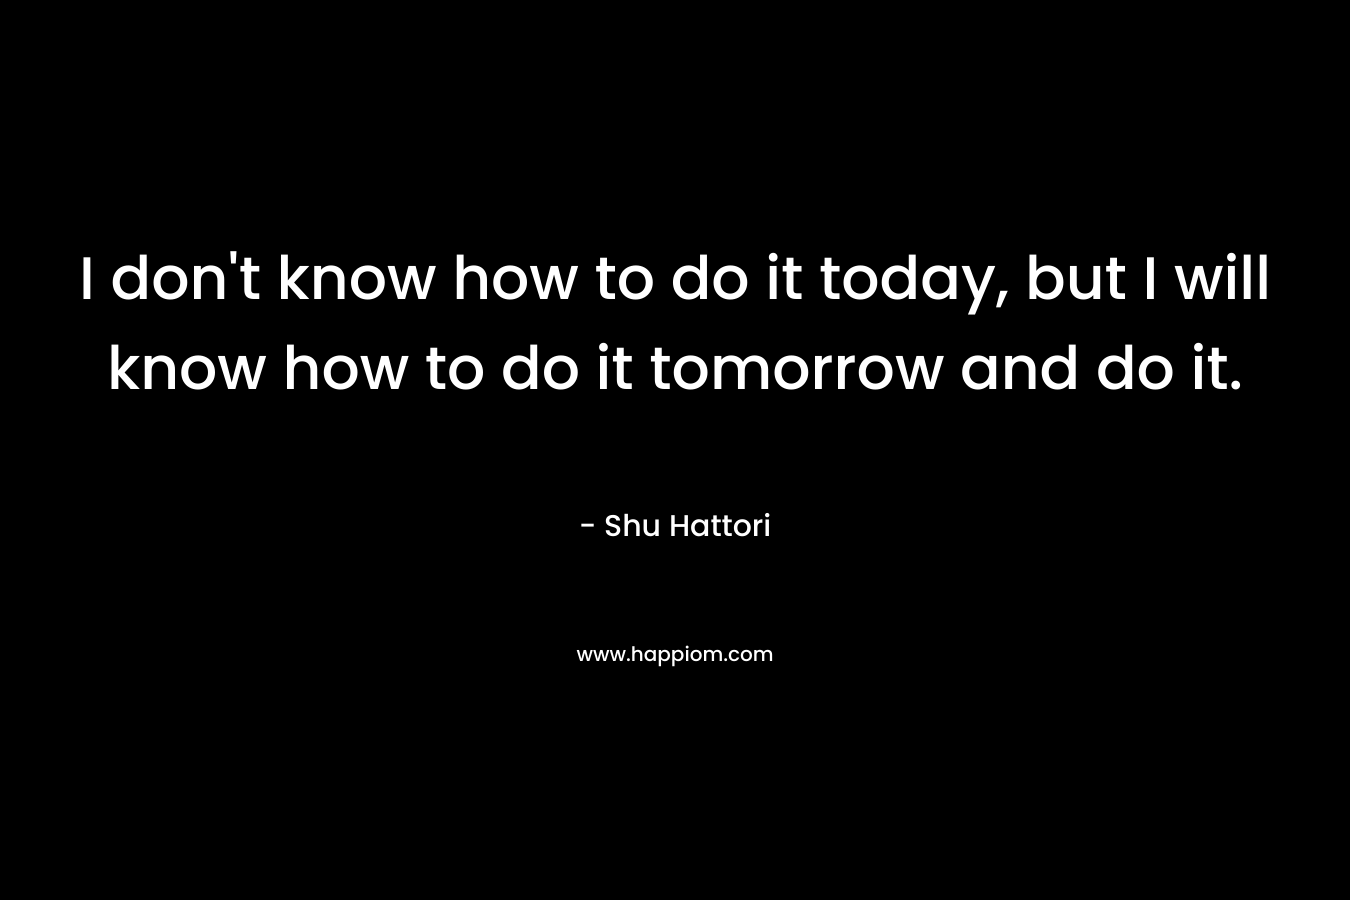 I don't know how to do it today, but I will know how to do it tomorrow and do it.